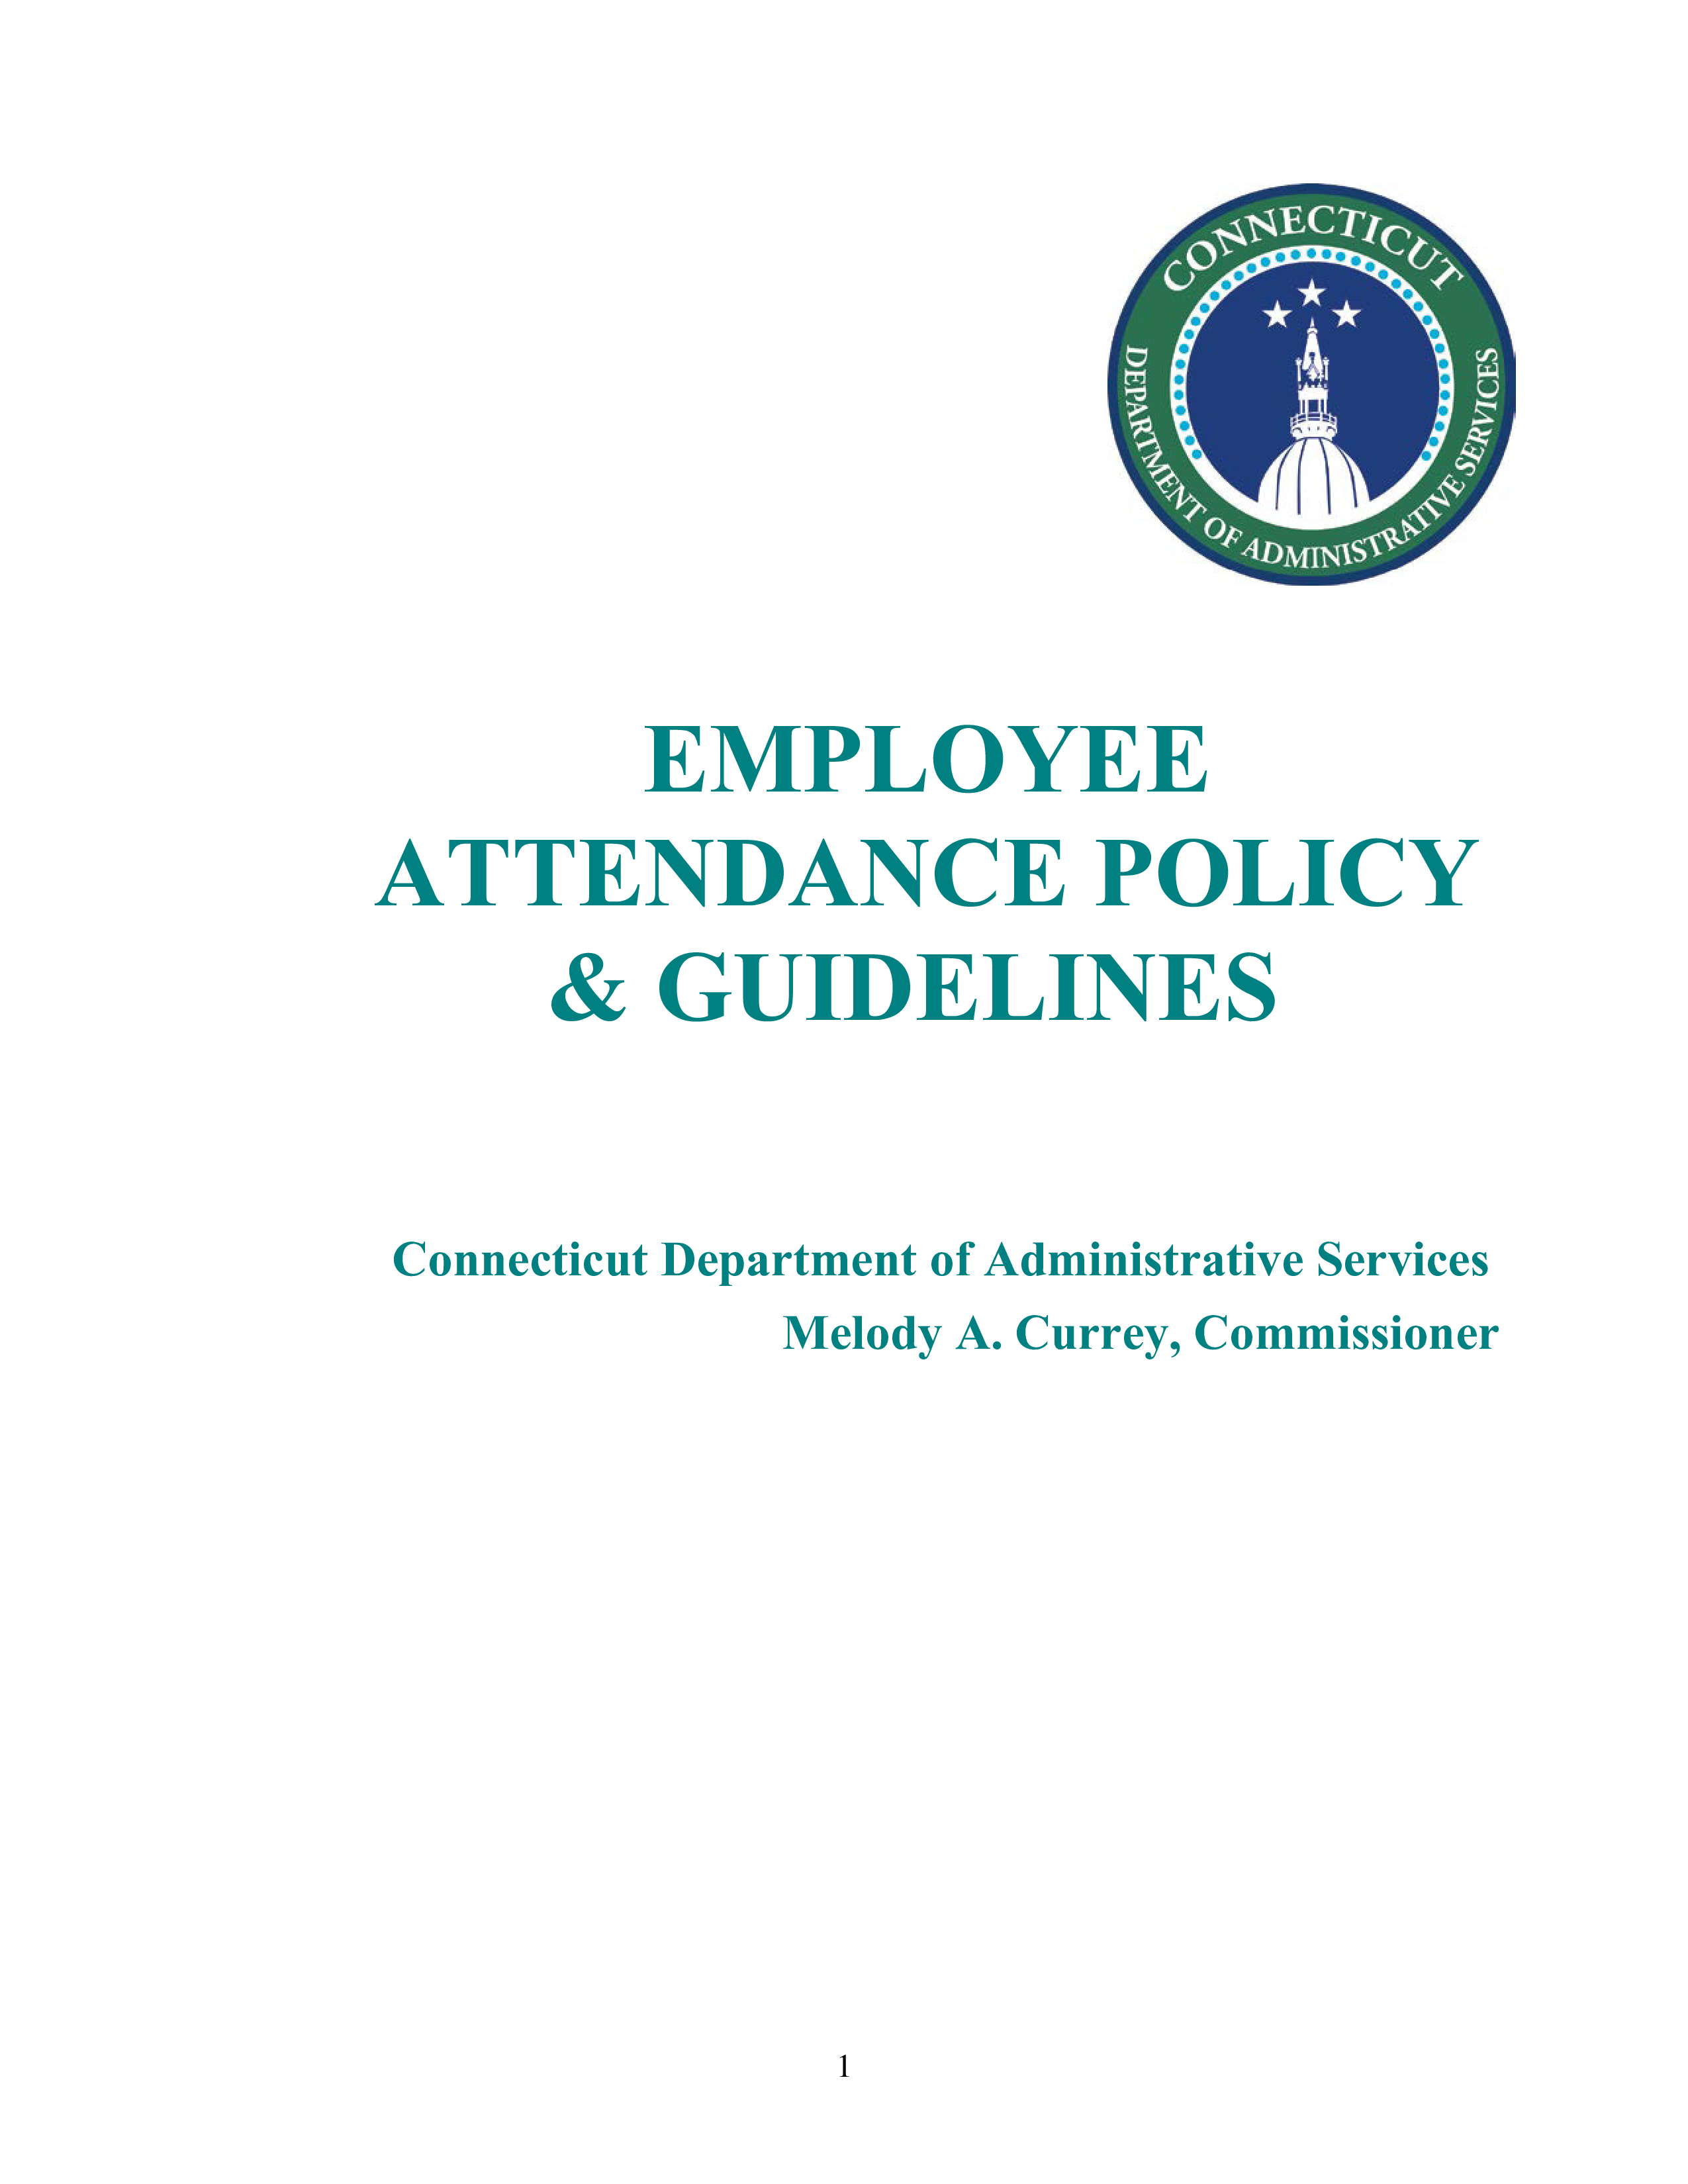 Employee Attendance Policy Guidelines Templates at